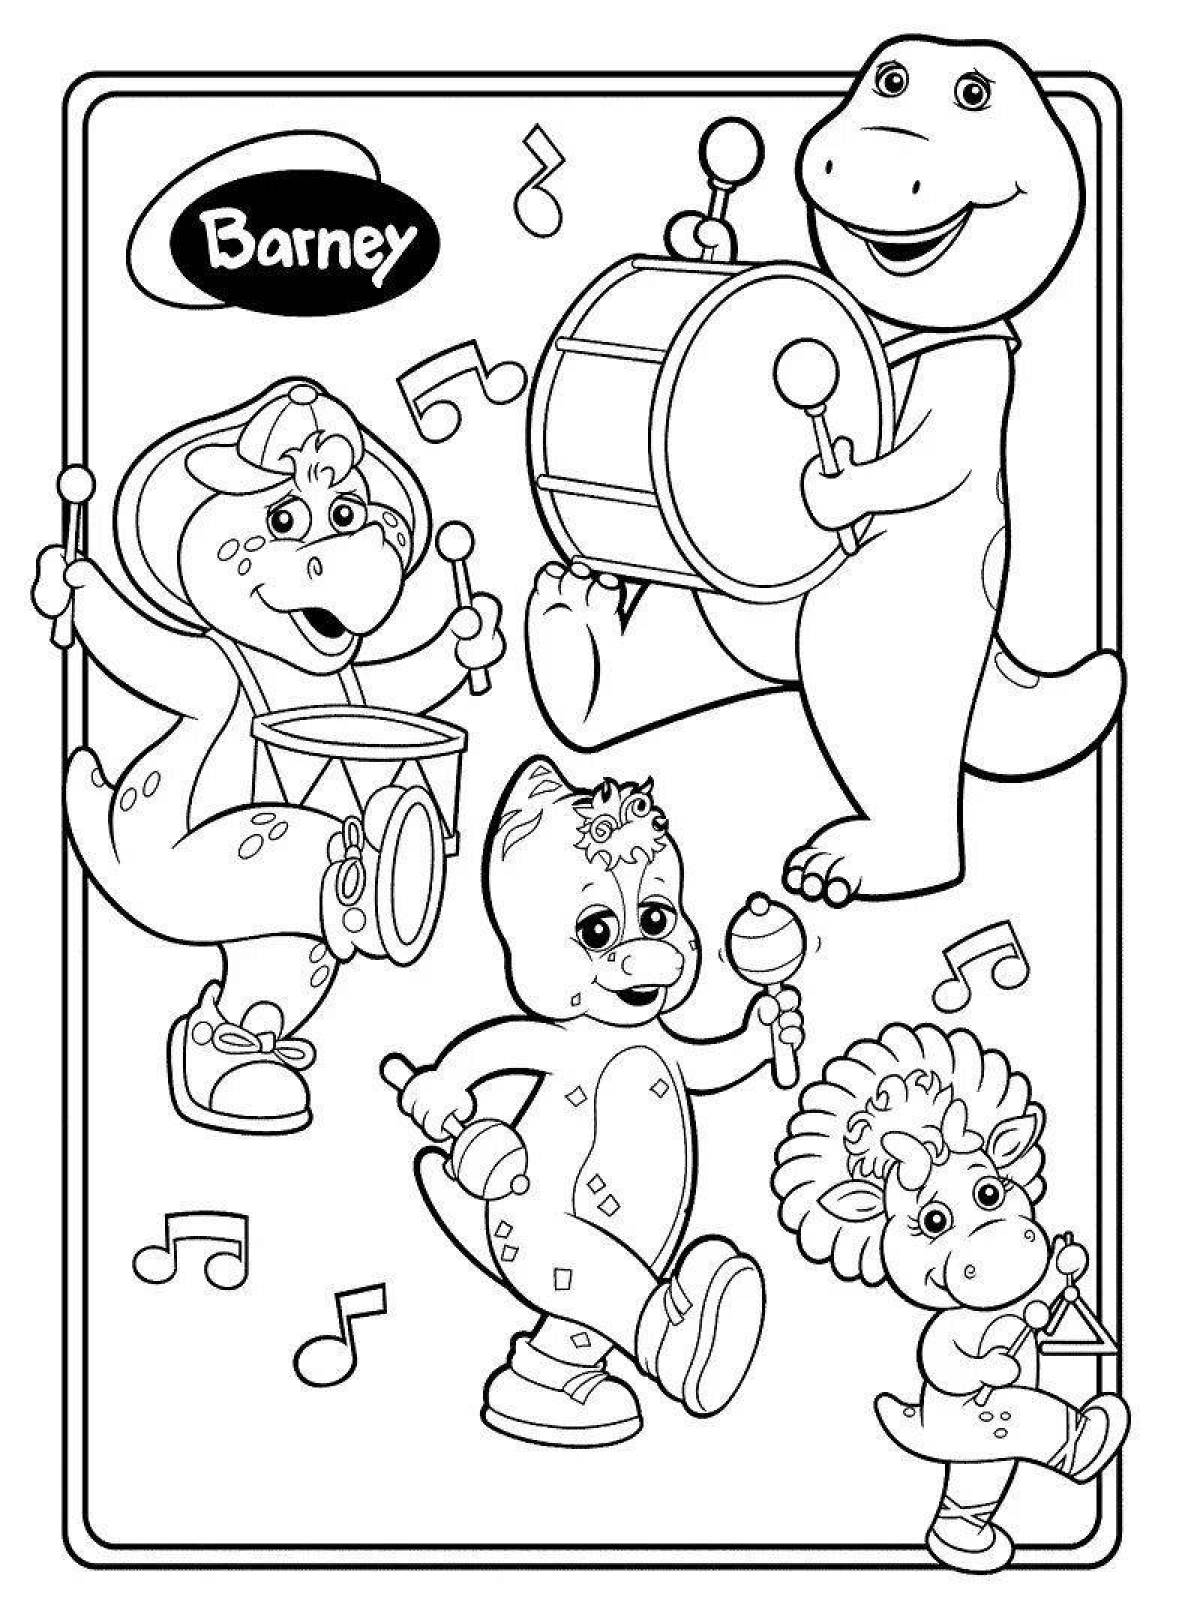 Coloring lively barney